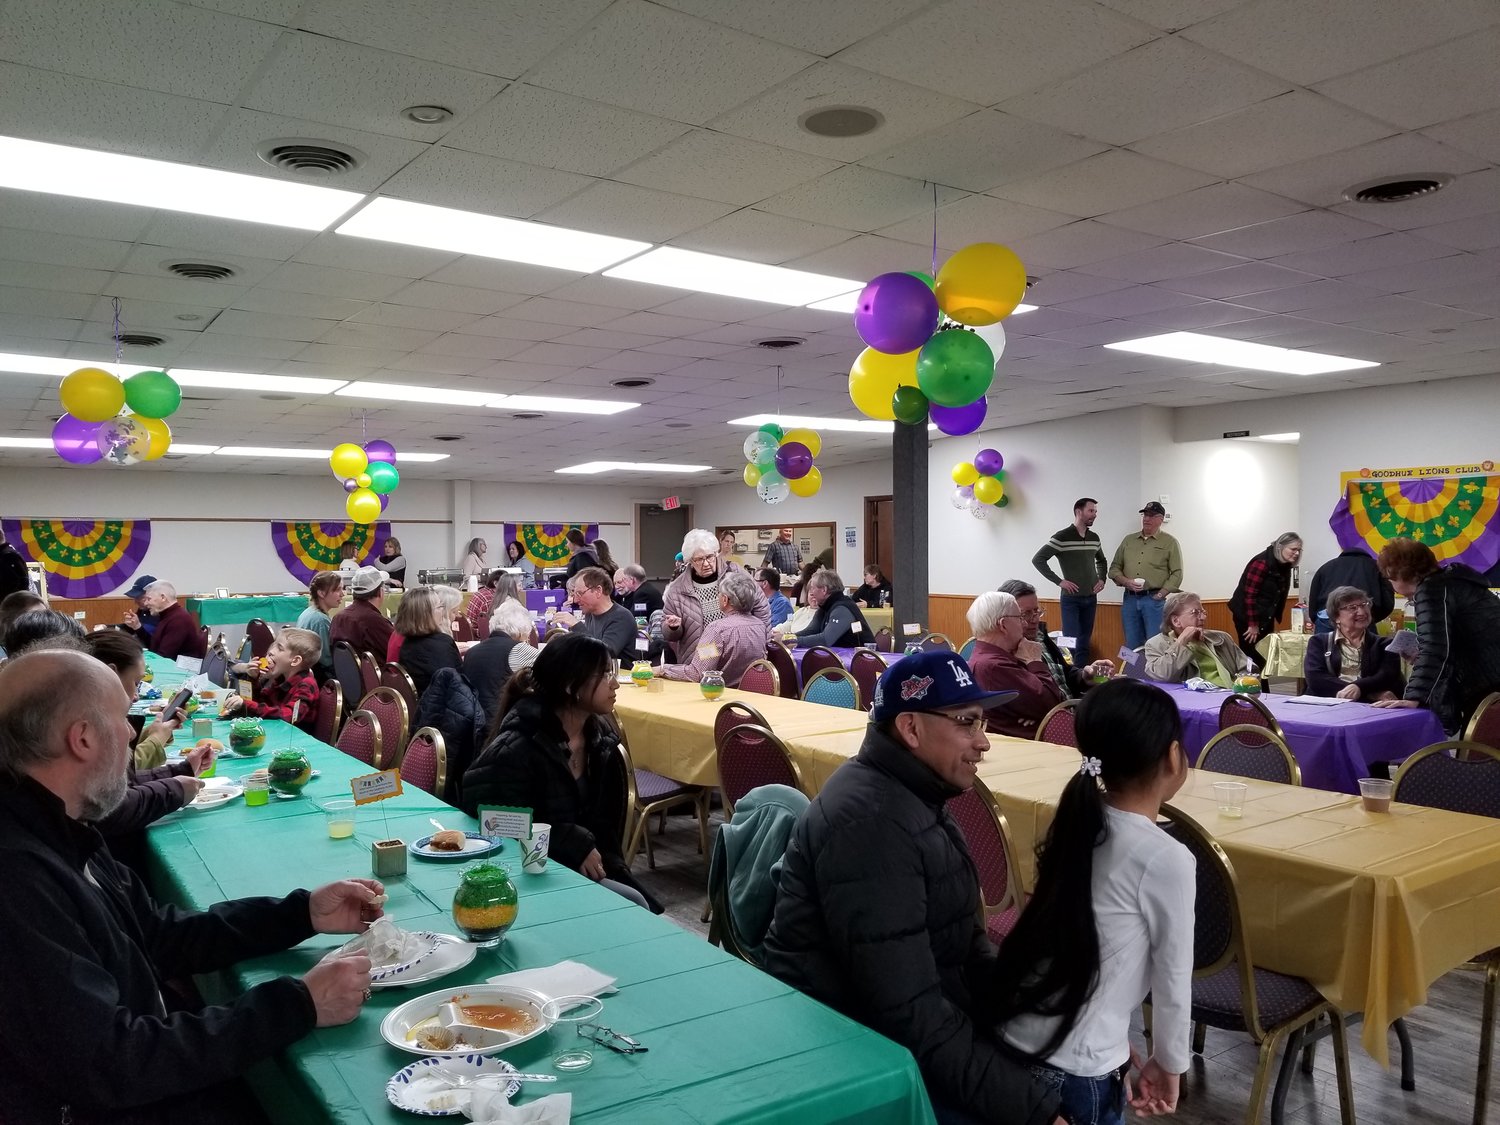 The first of its kind Mardi Gras event held in the Lion's Community Center on February 19th drew a large crowd to the festively decorated facility.